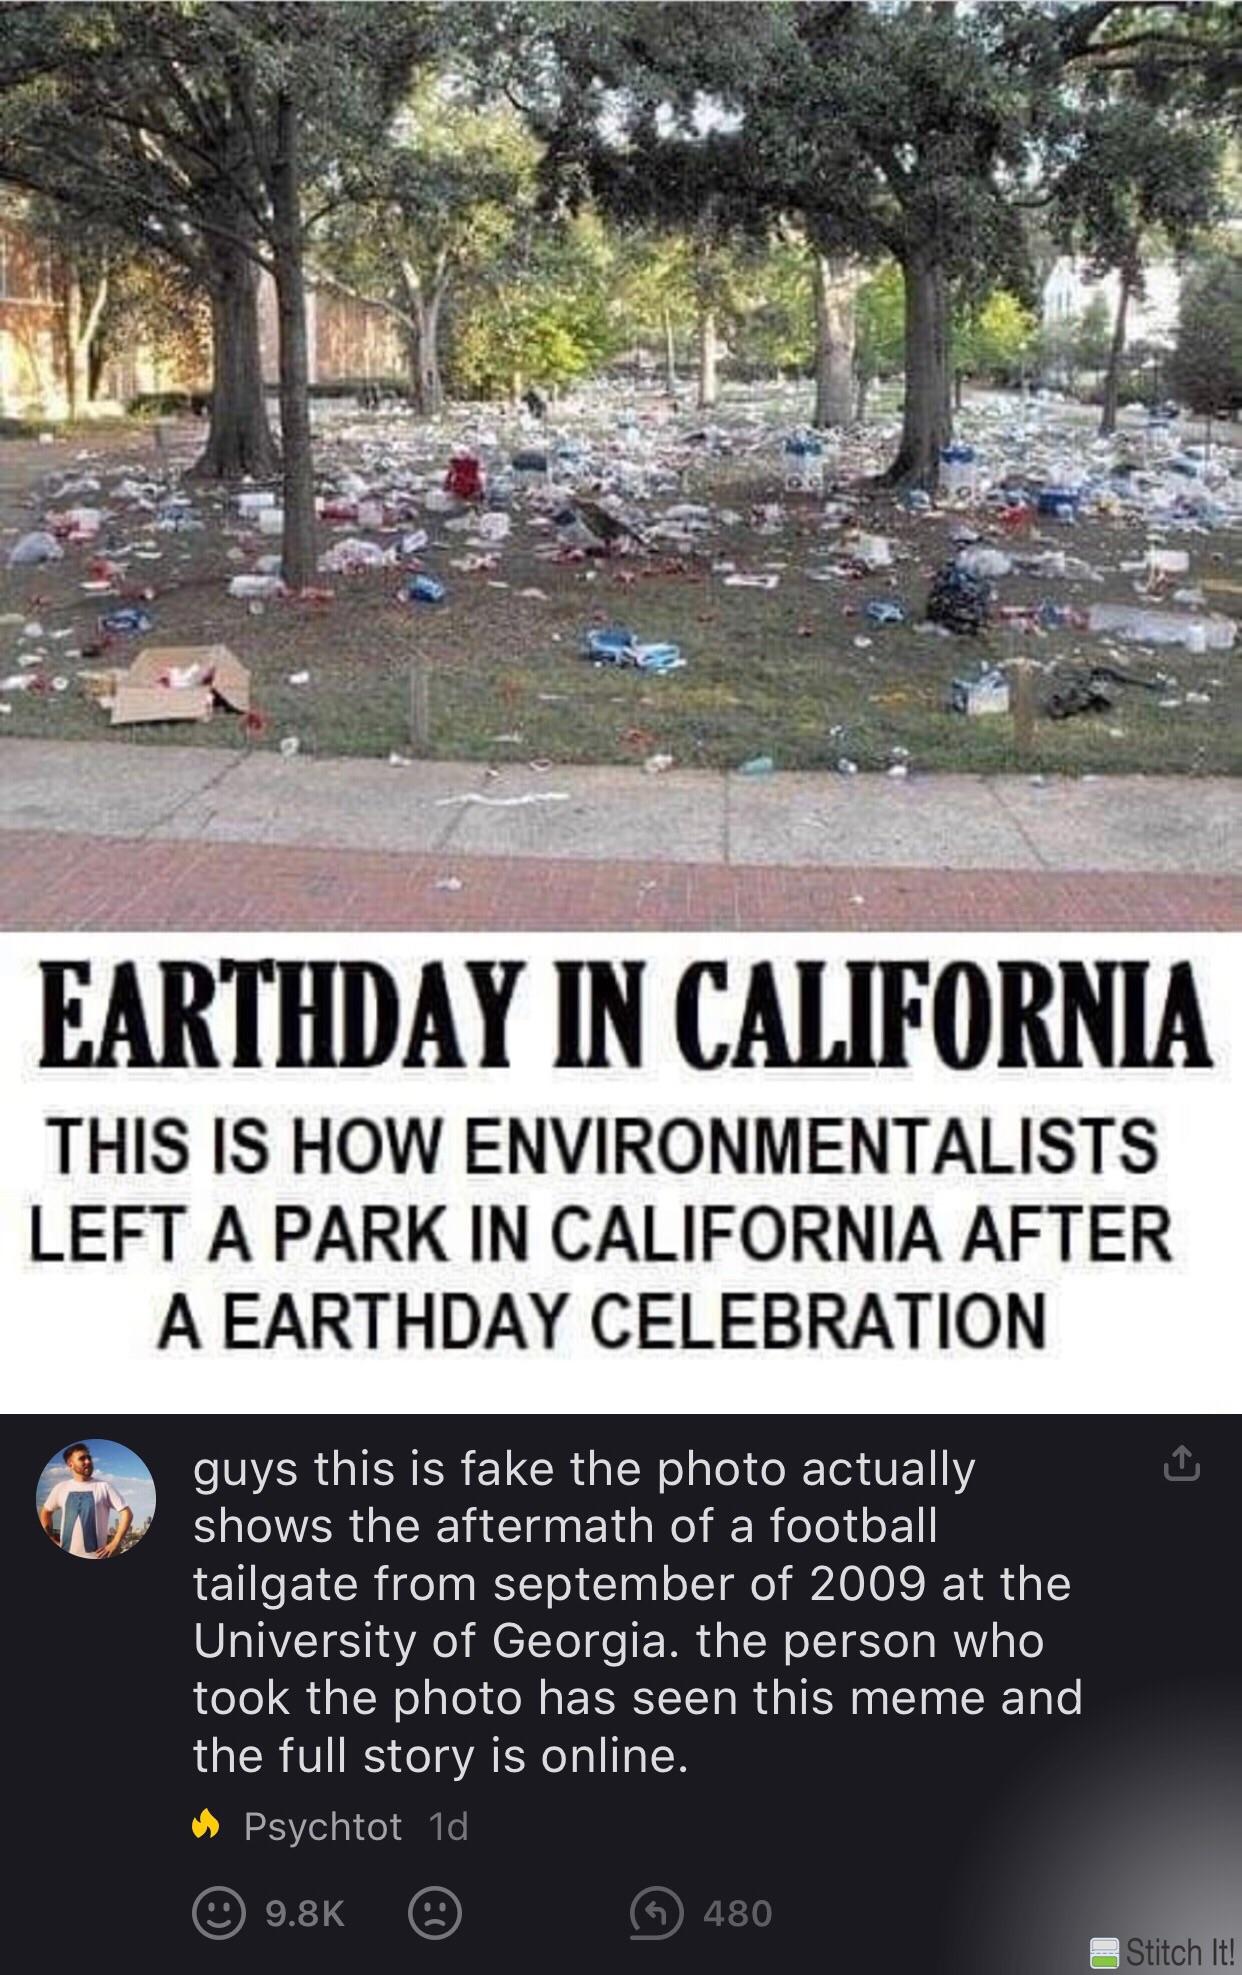 Bullshitters called out - trash after trump inauguration - Earthday In California This Is How Environmentalists Left A Park In California After A Earthday Celebration guys this is fake the photo actually shows the aftermath of a football tailgate from sep